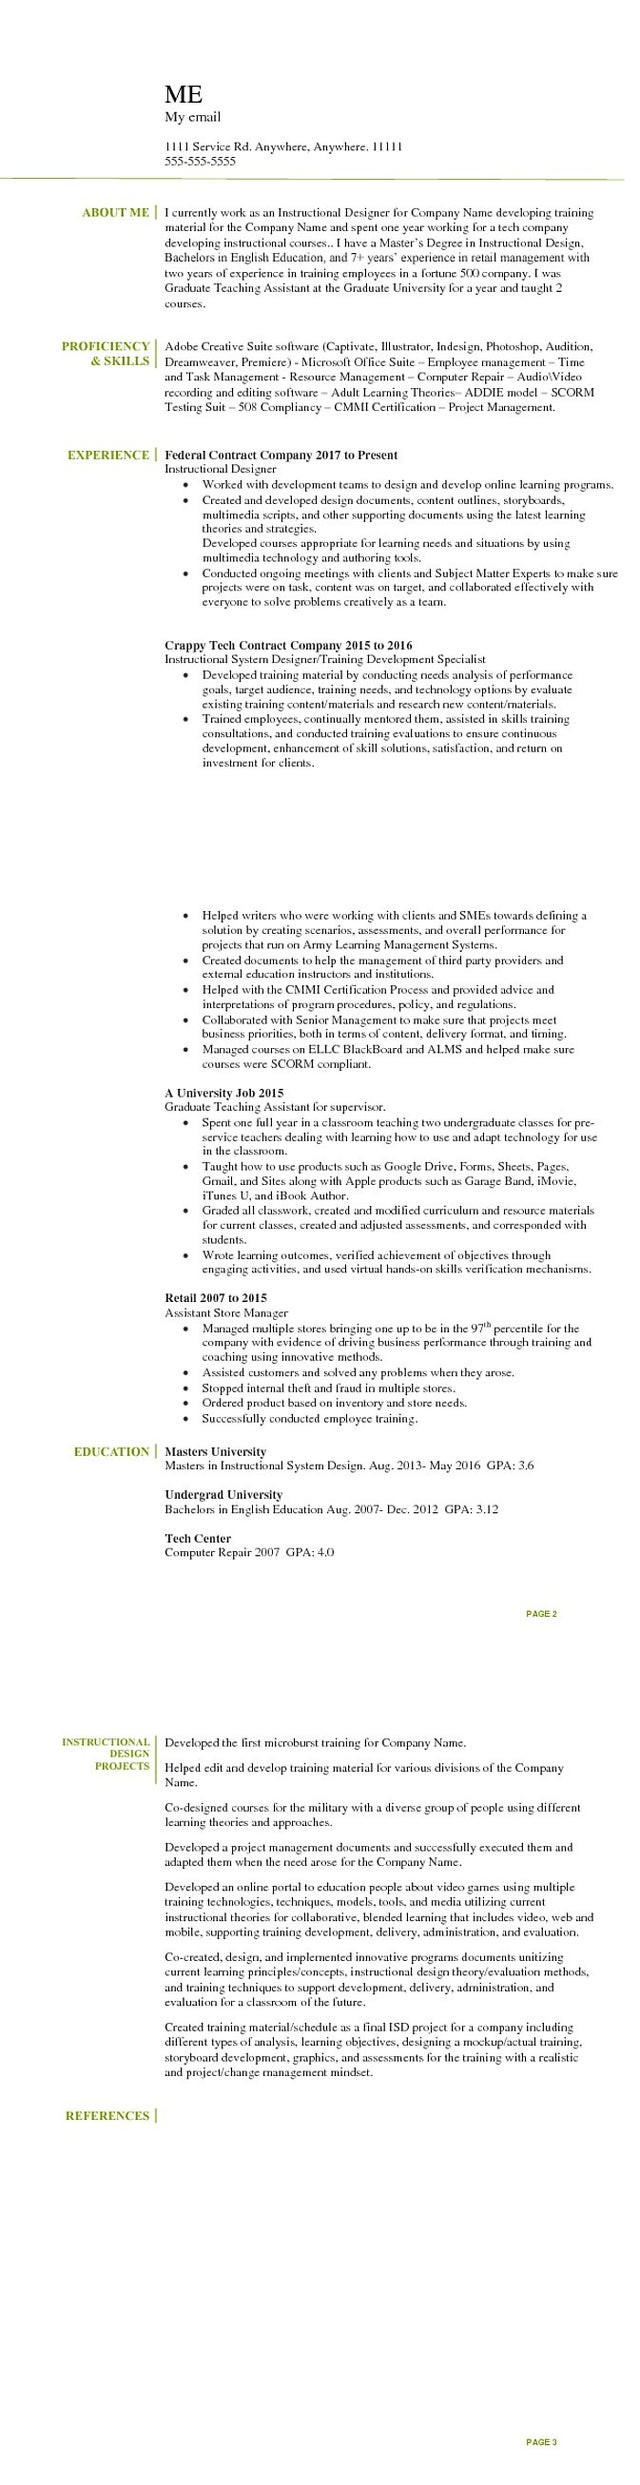 Instructional Systems Specialist Federal Resume Sample Posting My Instructional Designer Resume because I Could Use some …